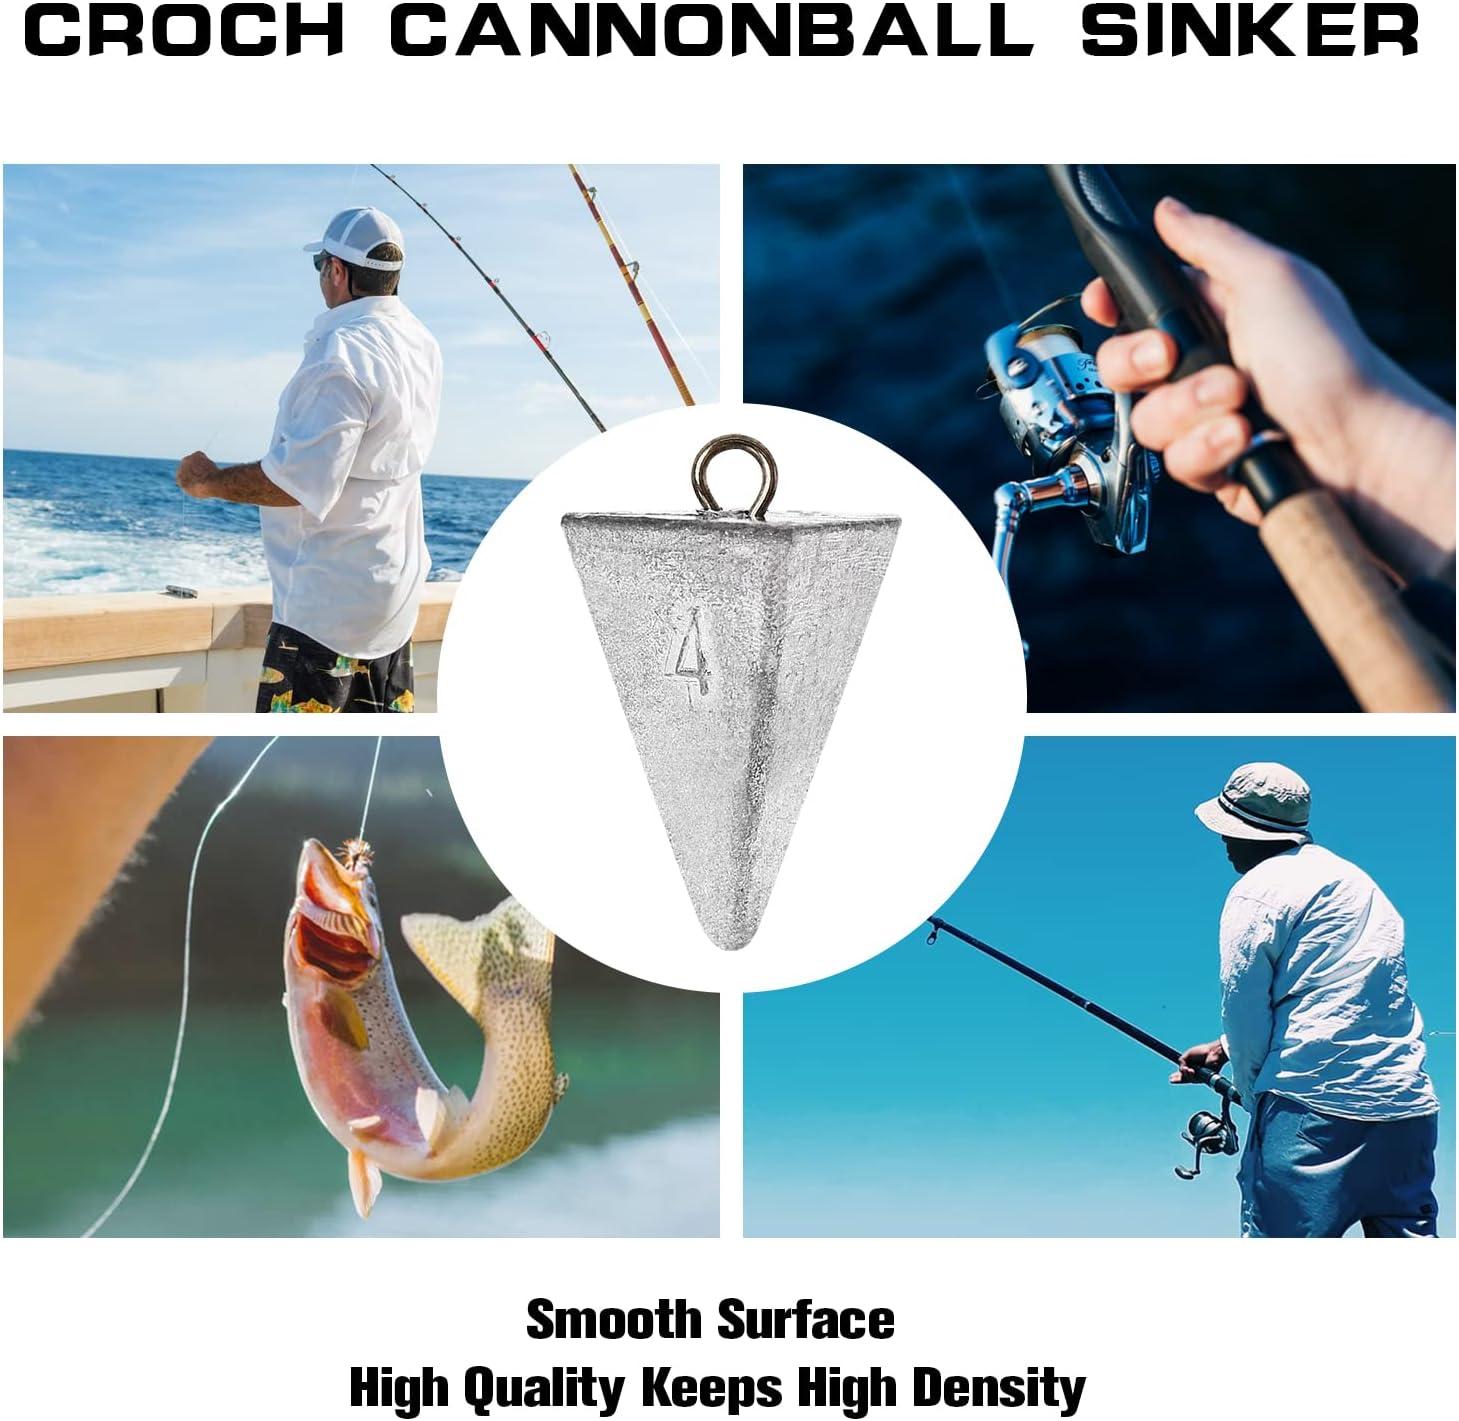 Croch Cannonball Sinkers, Fishing Sinkers and Weights for